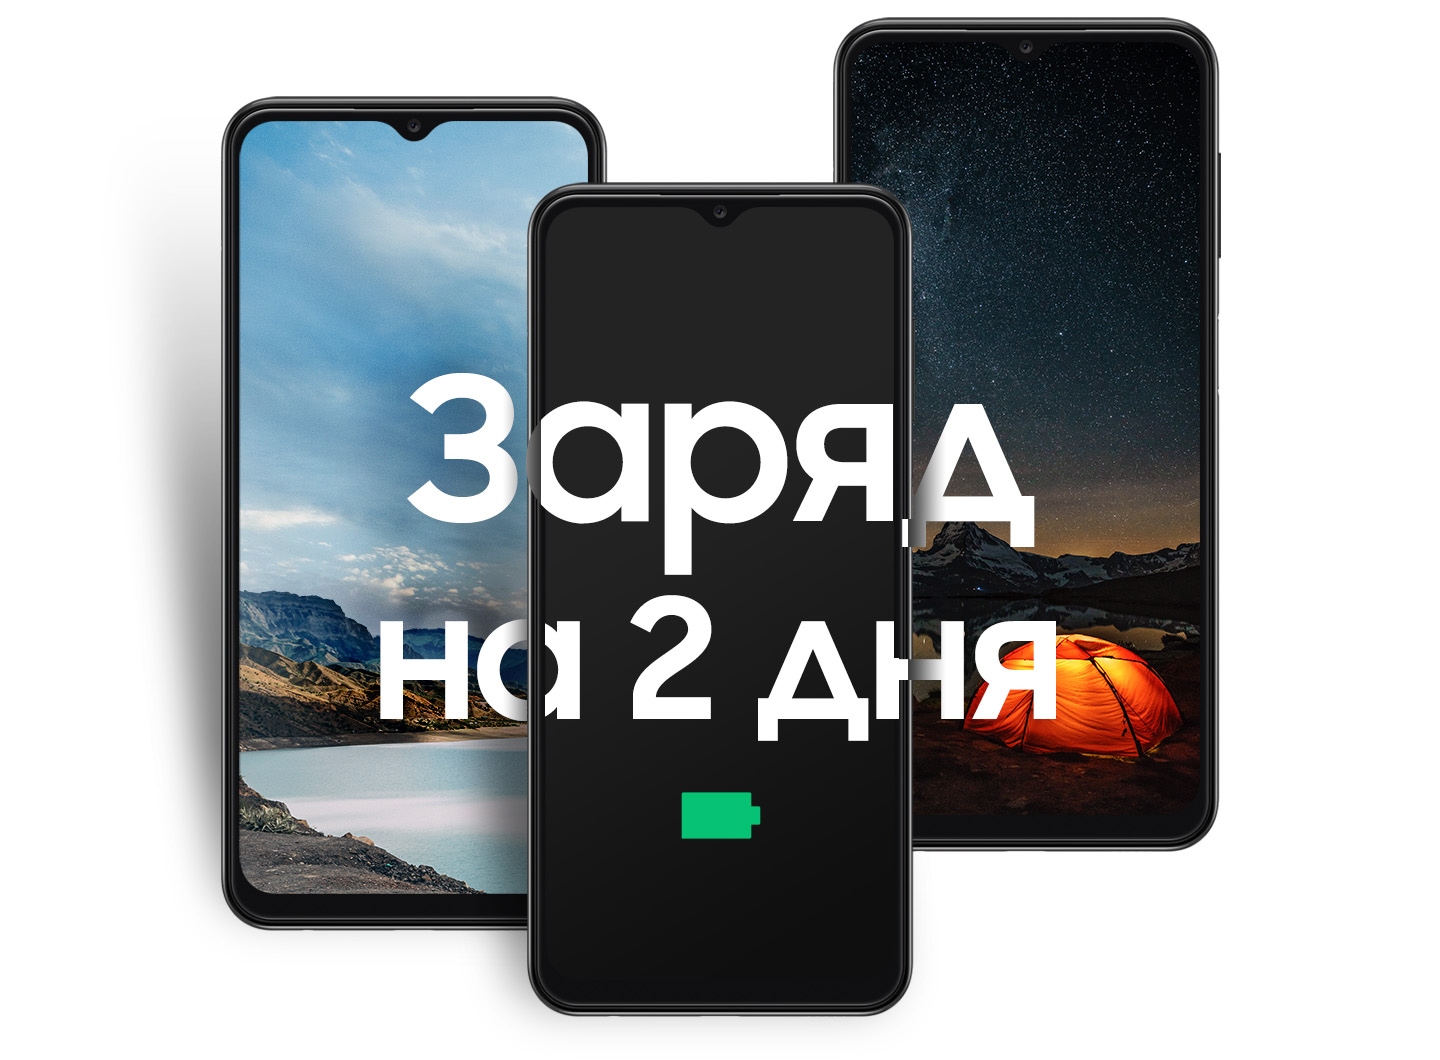 The Galaxy A13 is placed between two landscape images, with the left showing the scenery of the coast during the day and the right showing the scenery of tents and mountains at night. Text reads 2 Days Battery.